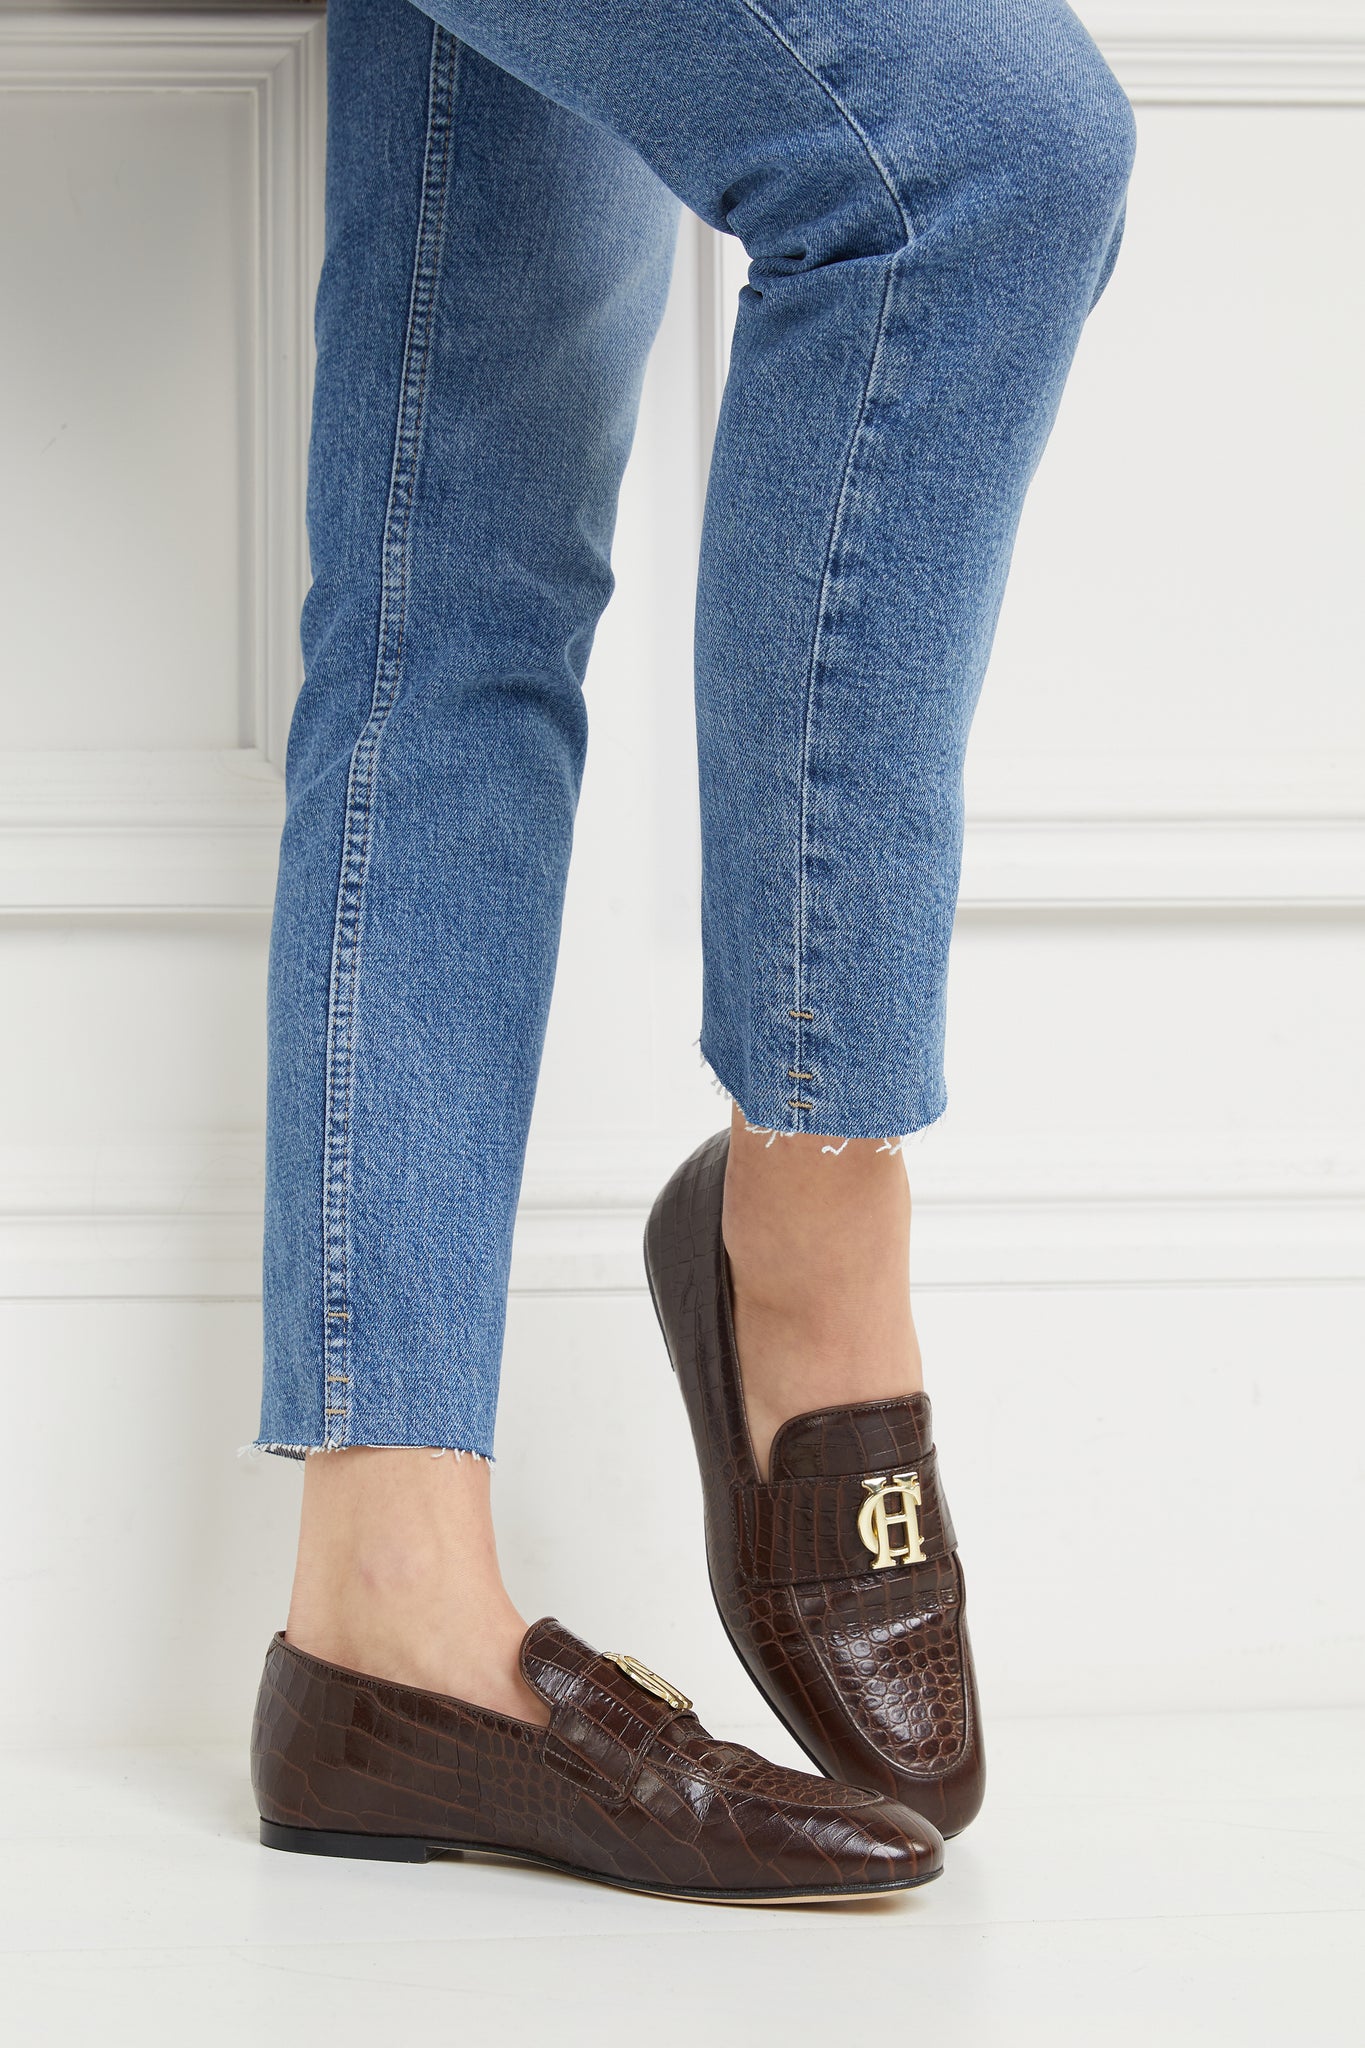 brown croc embossed leather loafers with a slightly pointed toe and gold hardware to the top, paired with denim slim jeans